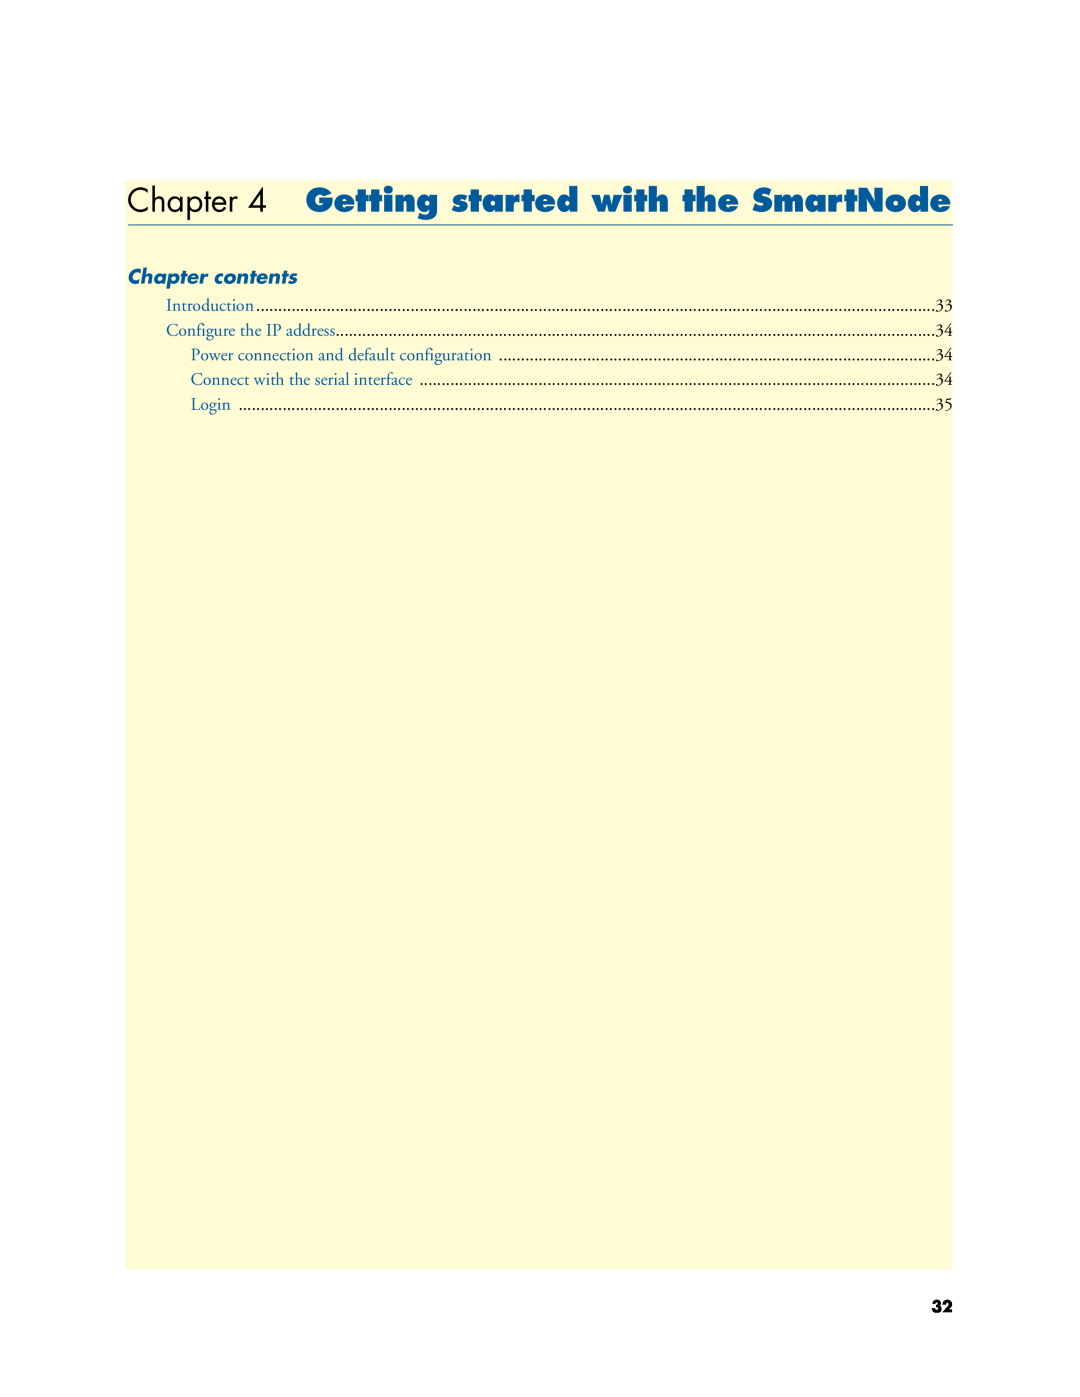 Patton electronic 2294, 2292 manual Getting started with the SmartNode, Chapter contents 